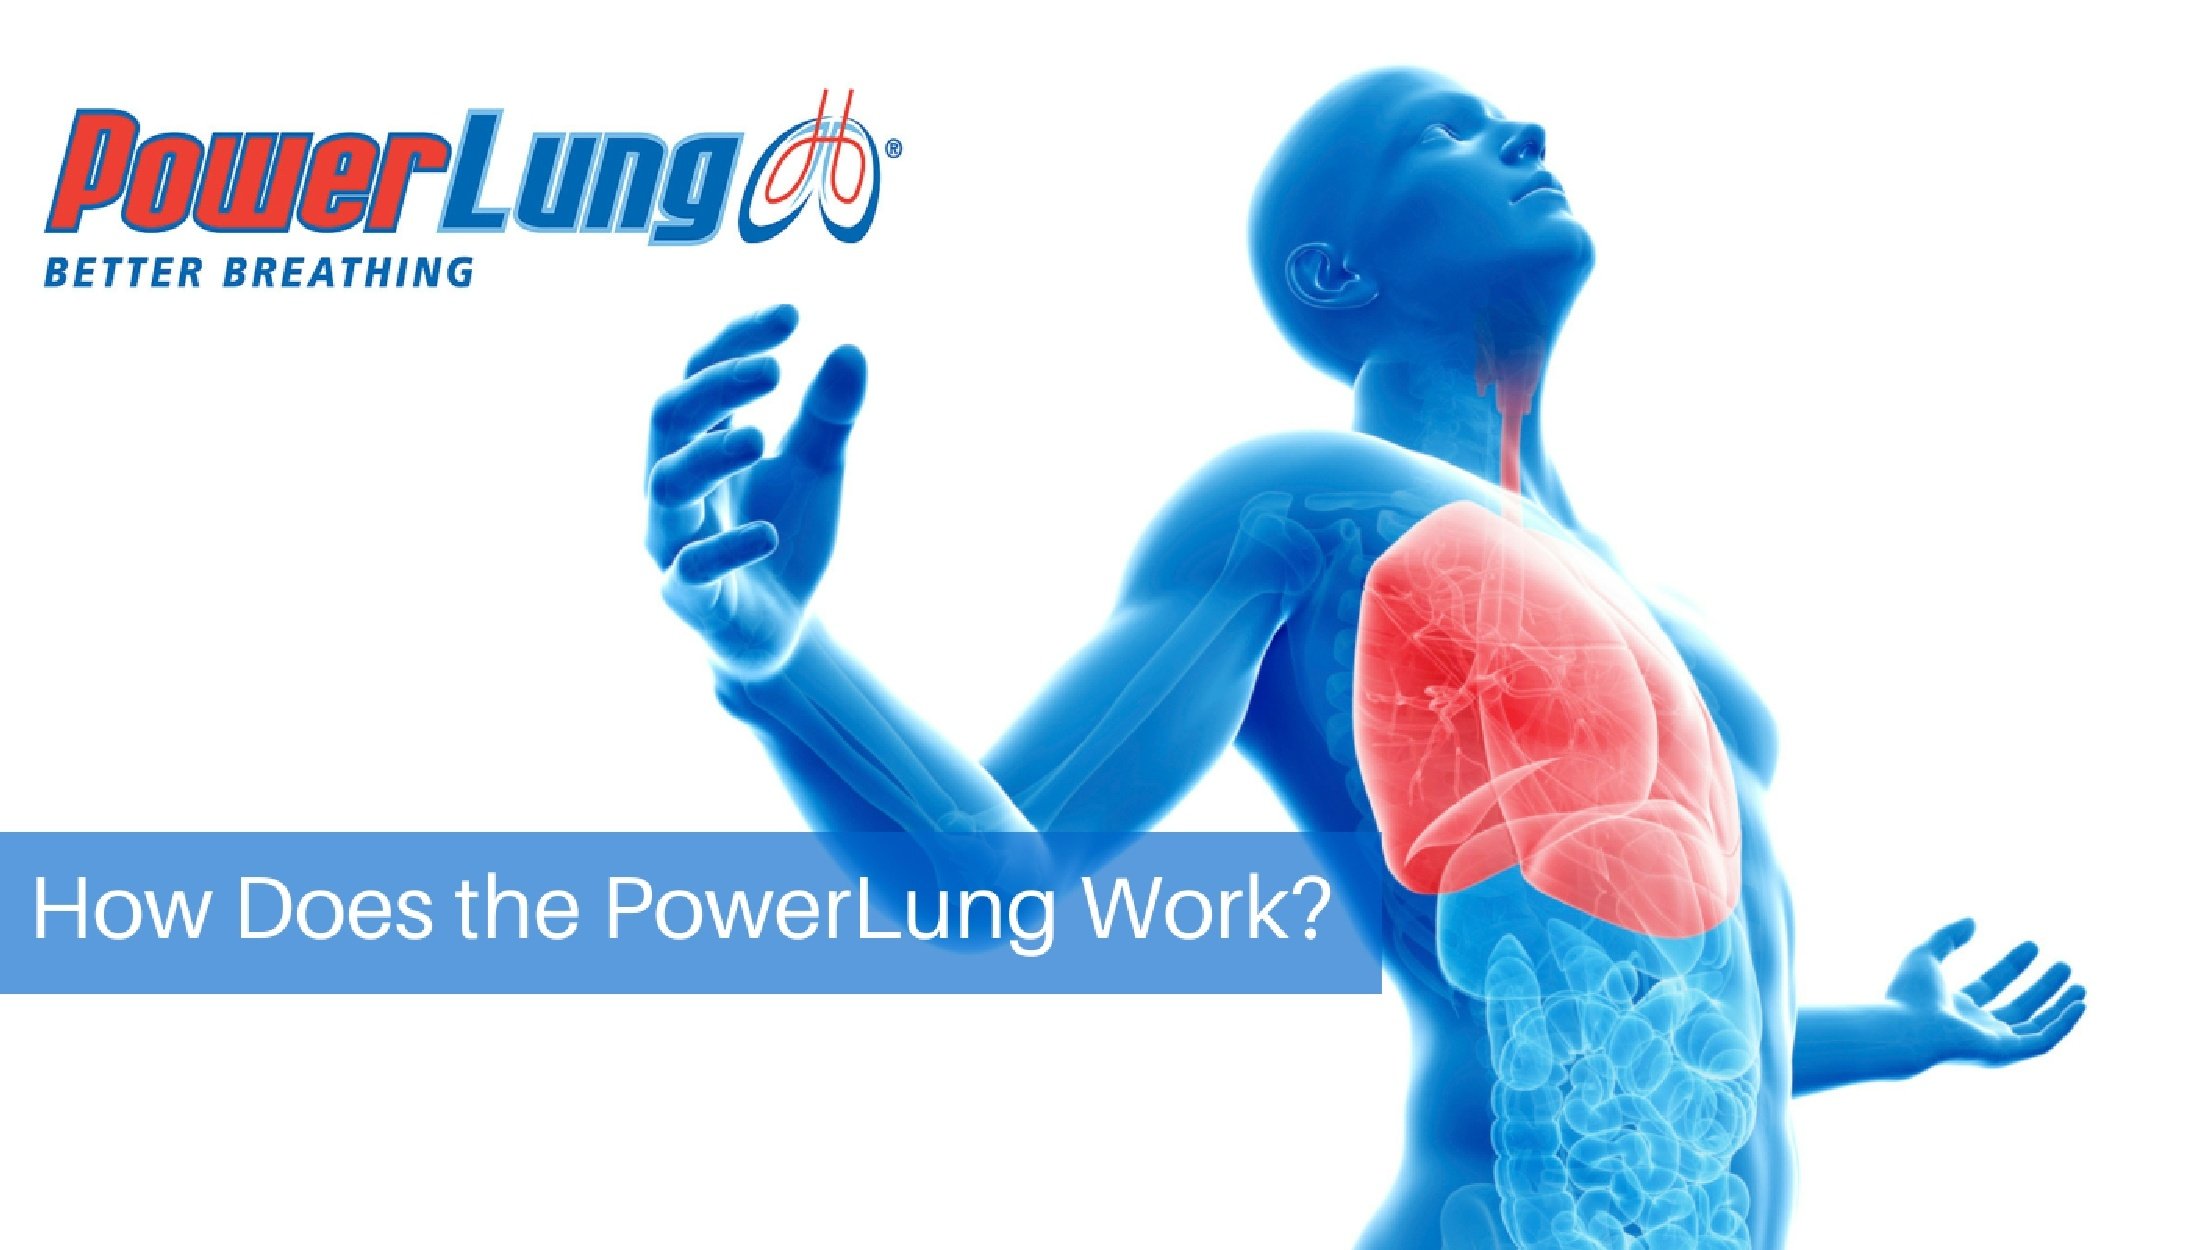 PowerLung - How Does the PowerLung Work-.jpg